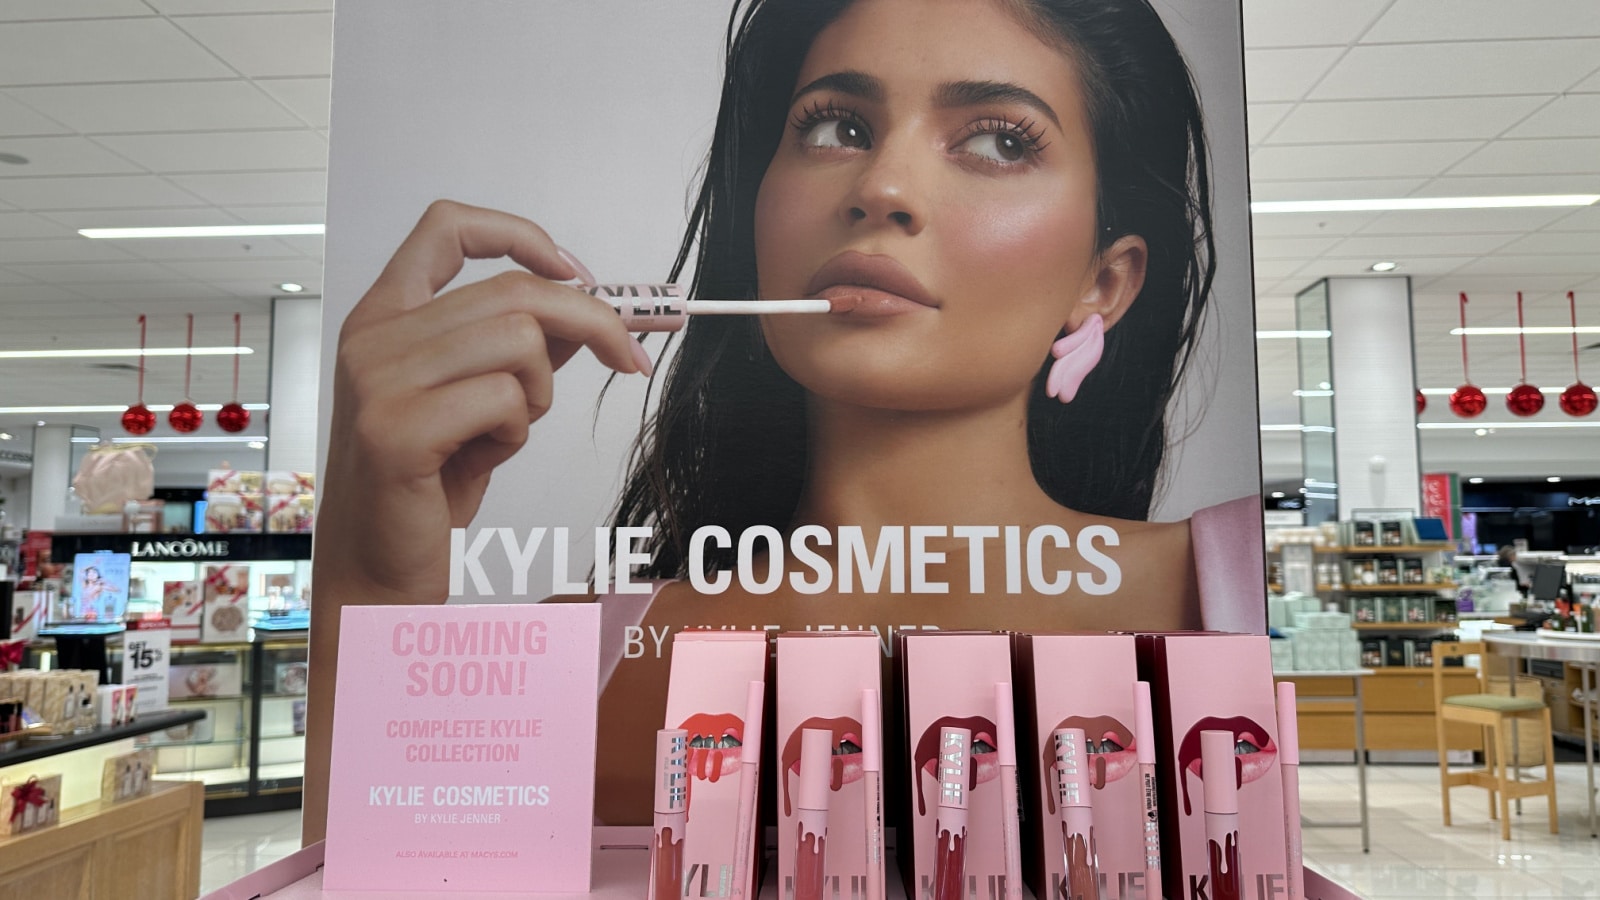 Minnetonka, Minnesota - December 2, 2022: Display of Kylie Cosmetics by Kylie Jenner matte lip kit, at a Macy's department store